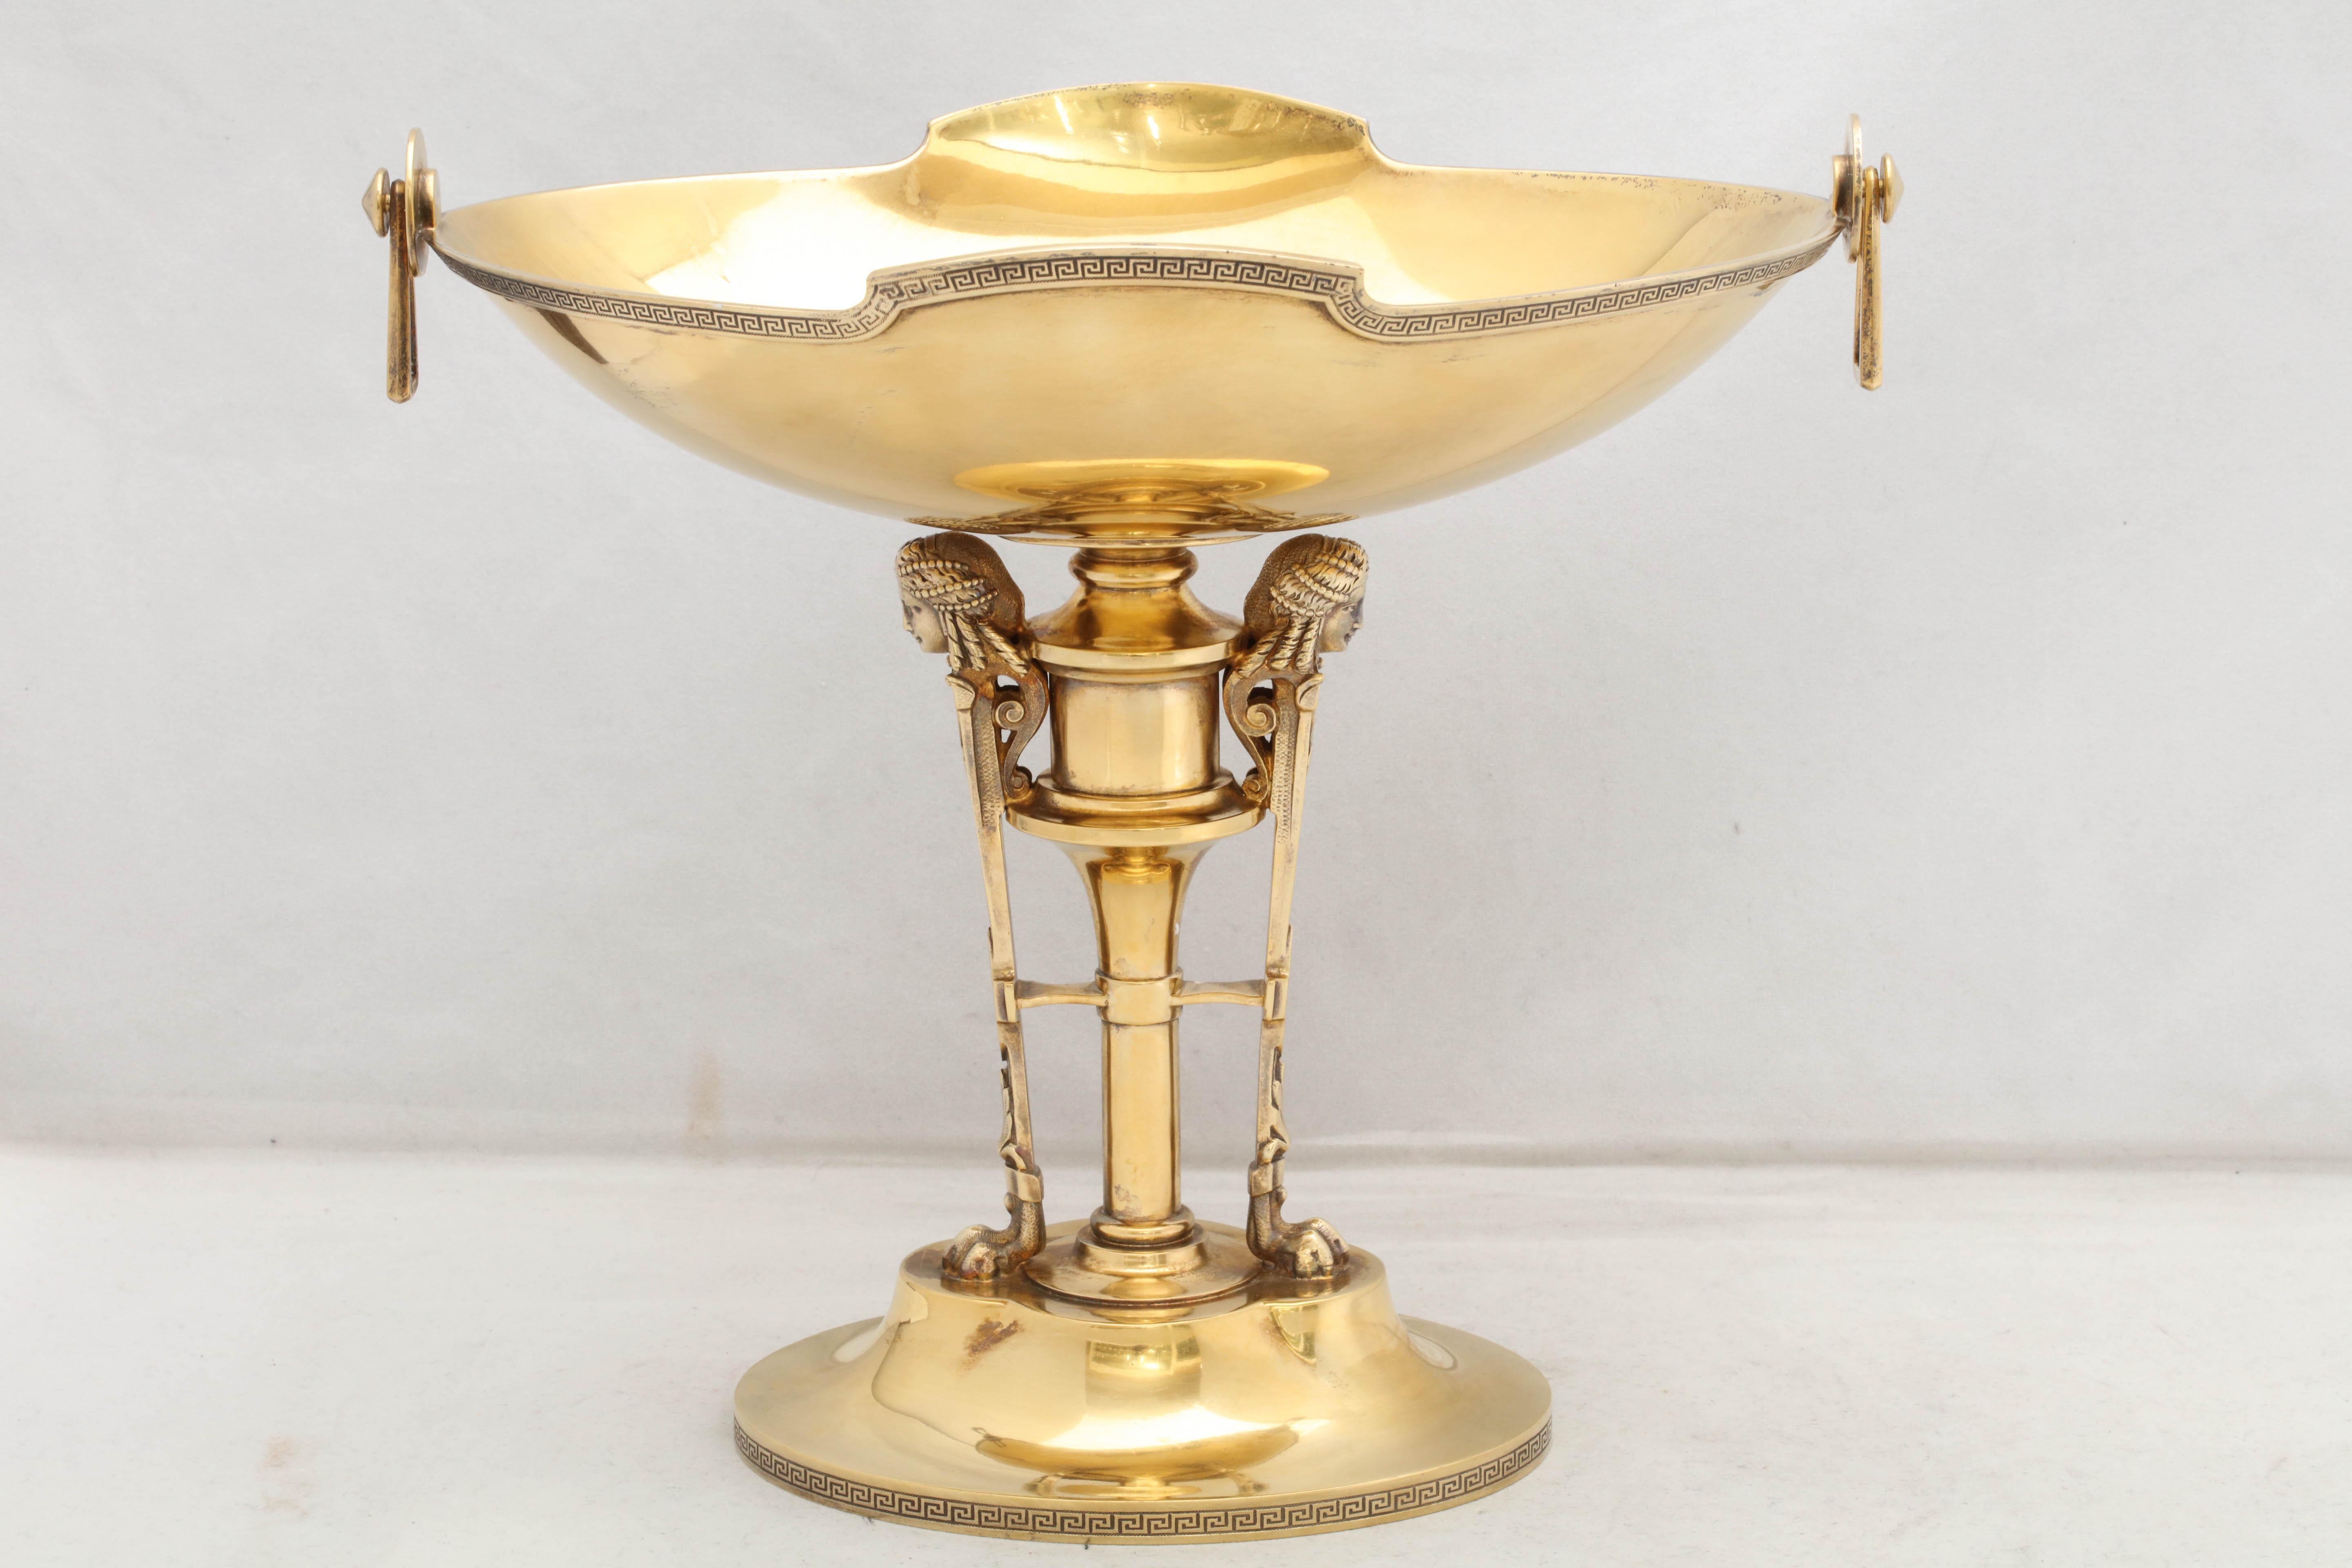 Neoclassical, sterling silver gilt centrepiece, Gorham Manufacturing Co., Providence, Rhode Island, circa 1865. Dish is oval in form and has pendant handles that move. Stem is flanked by pilasters topped by busts. Greek key borders on dish and base.